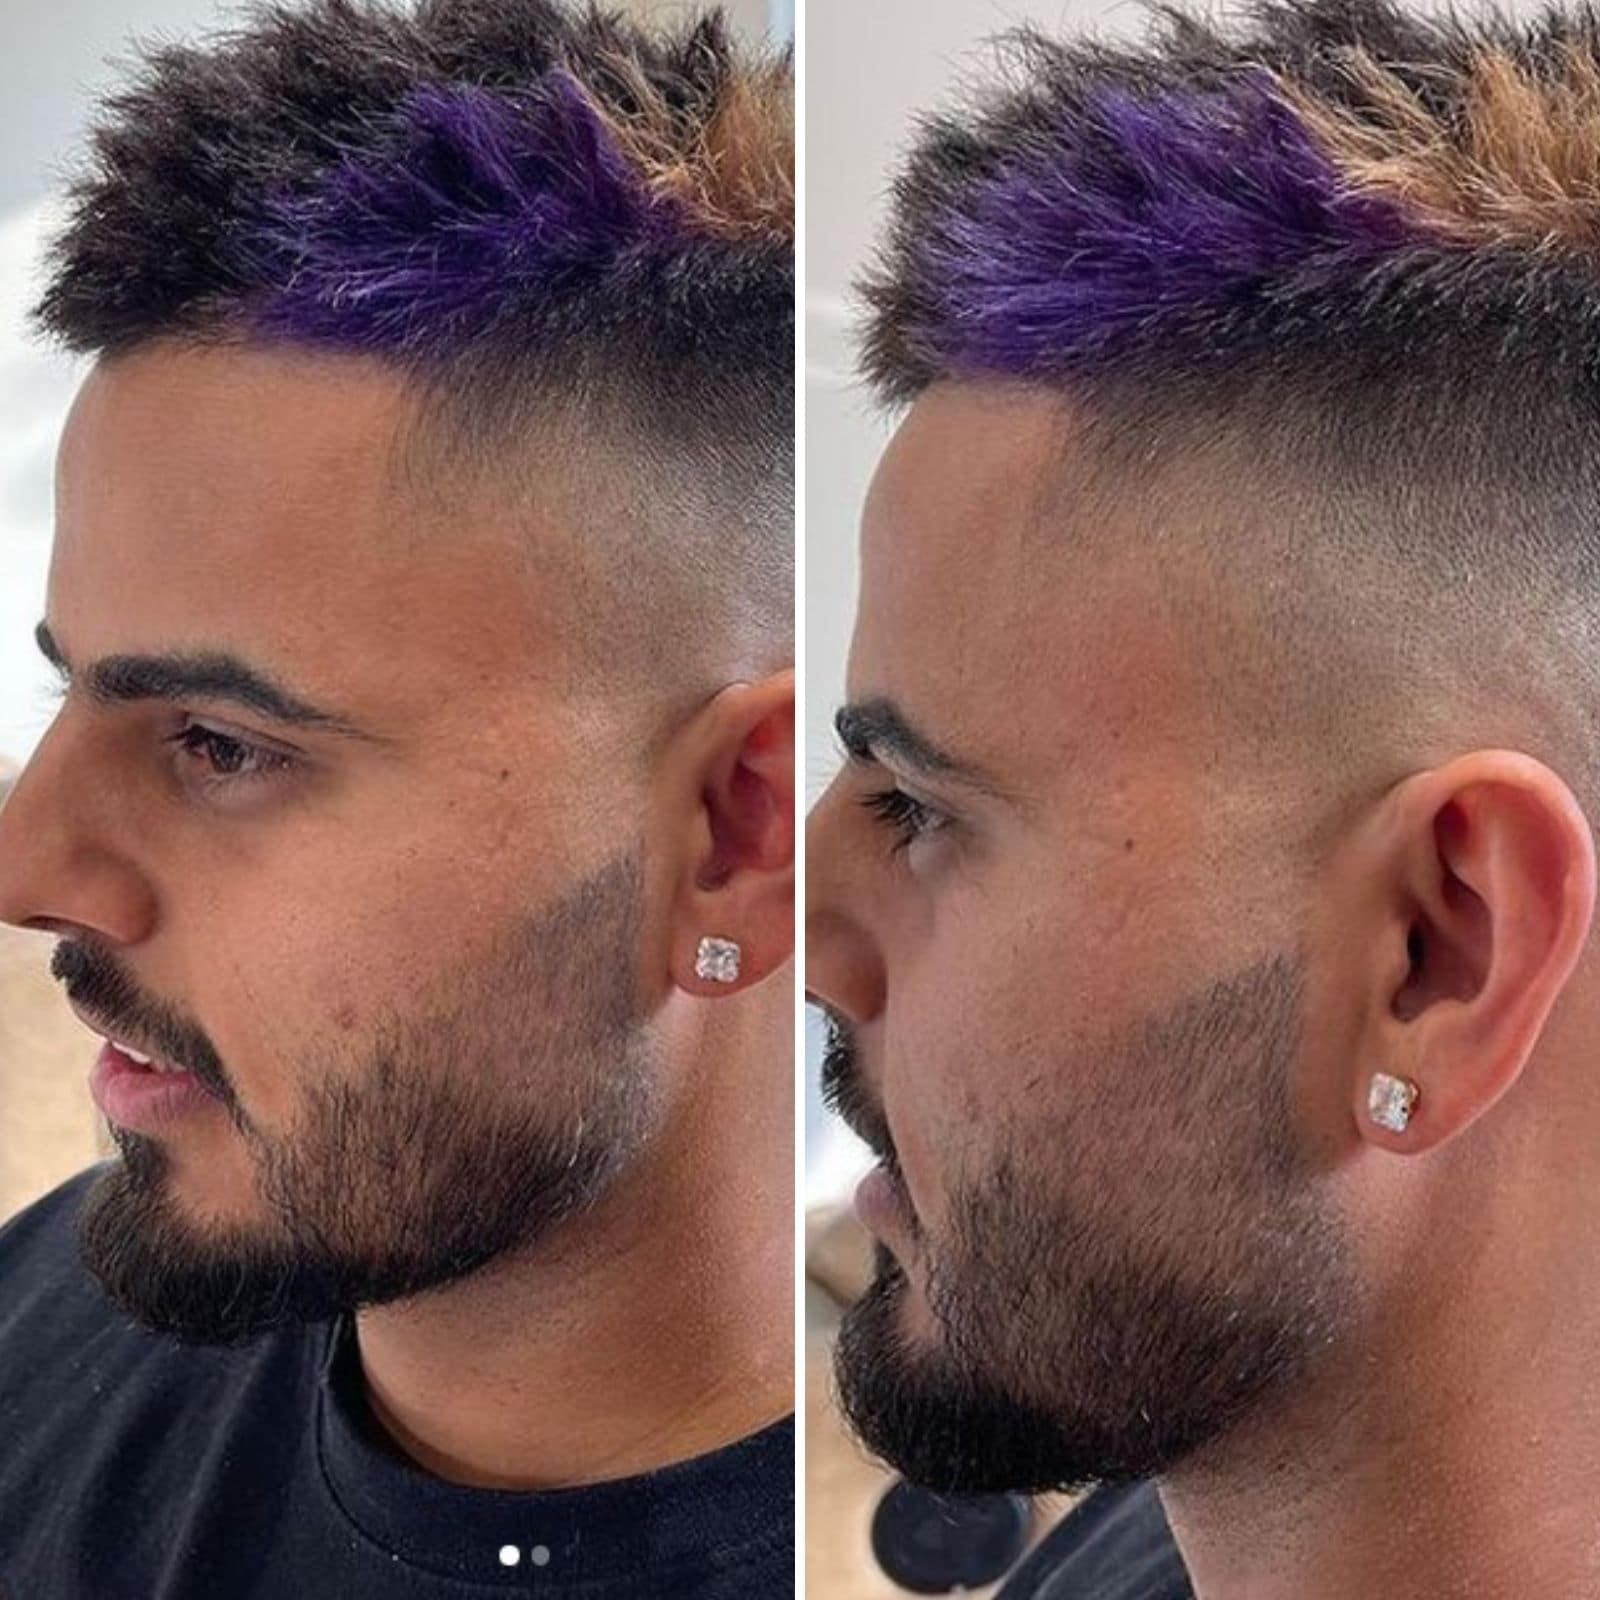 MS Dhoni's new hairstyle and 'dashing look' takes social media by storm,  puts fans in awe - myKhel